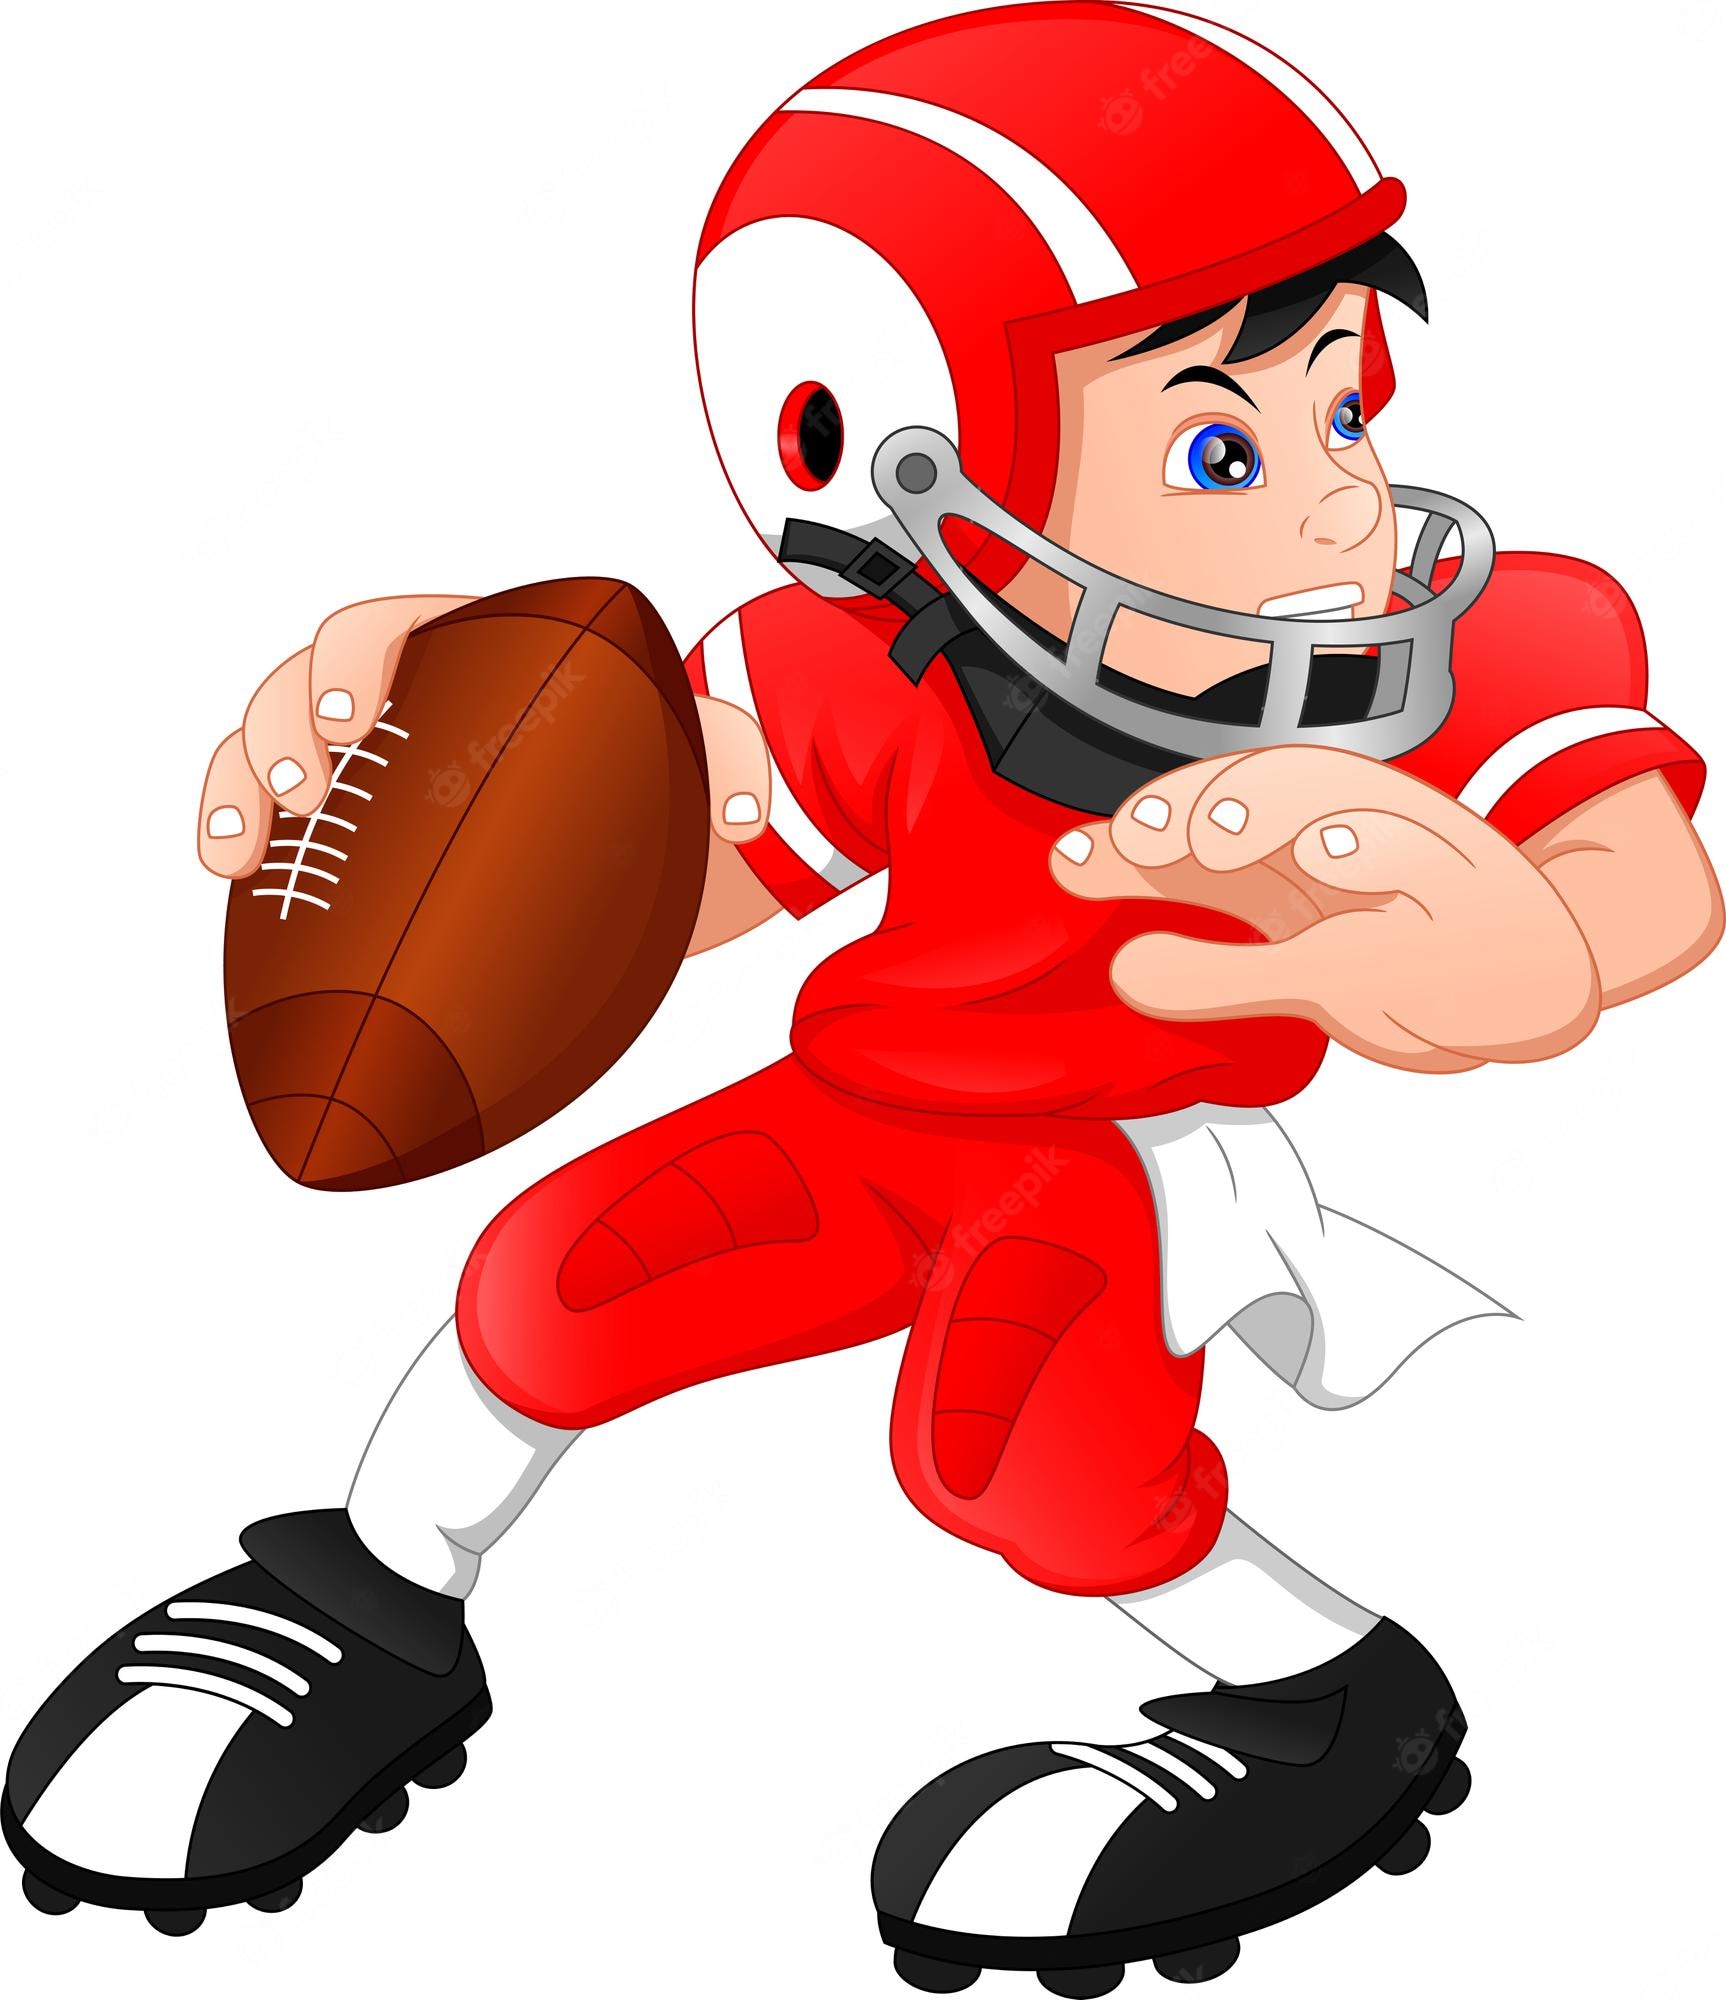 Clip art of the cartoon football player kid free image download - Clip ...